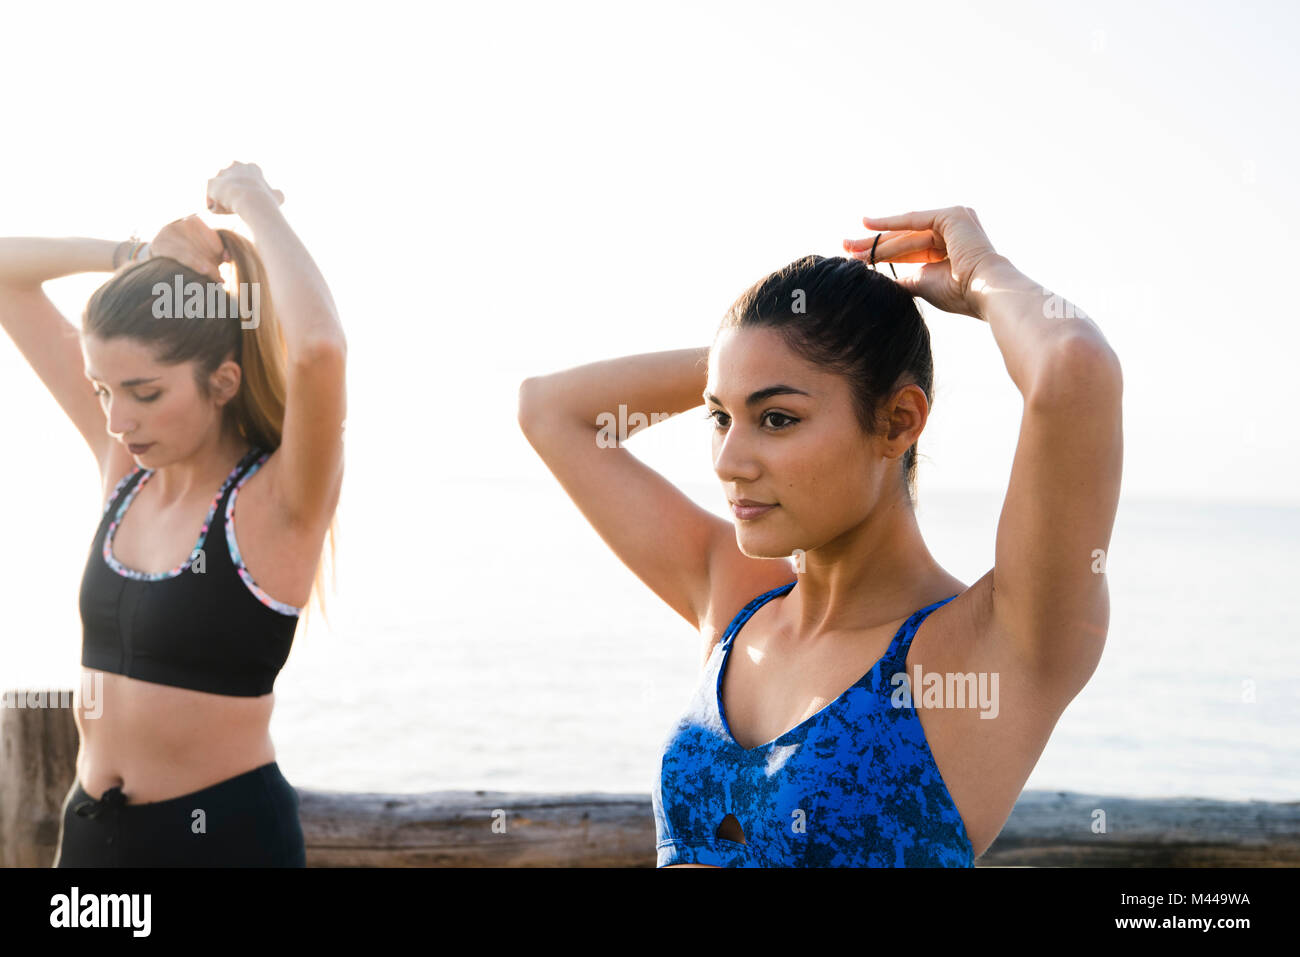 Two young women training on beach, tying hair ponytails Stock Photo